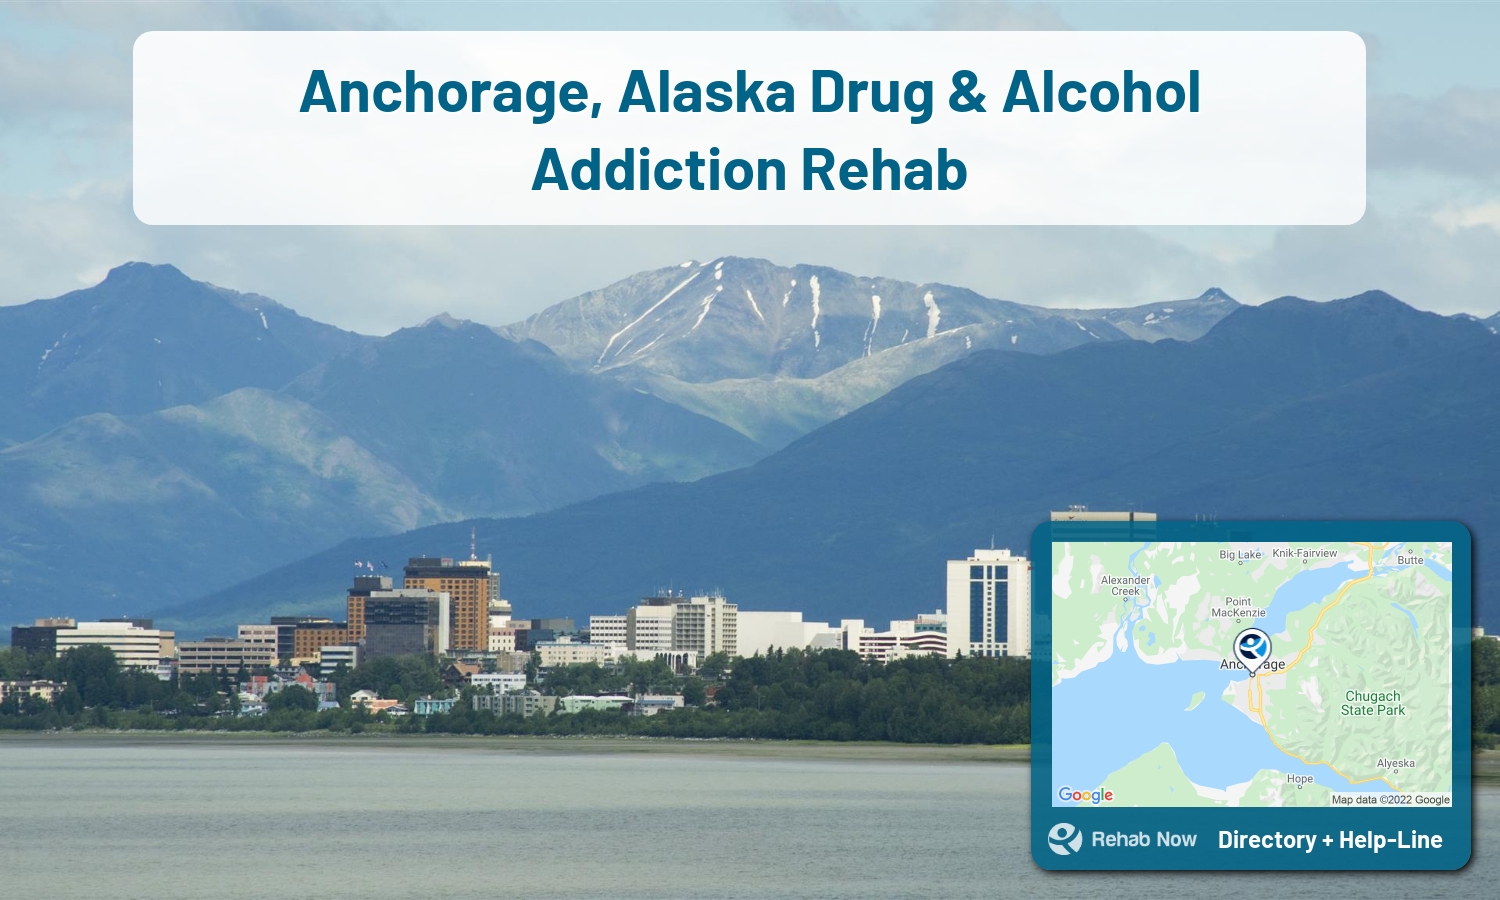 Let our expert counselors help find the best addiction treatment in Anchorage, Alaska, now with a free call to our hotline.